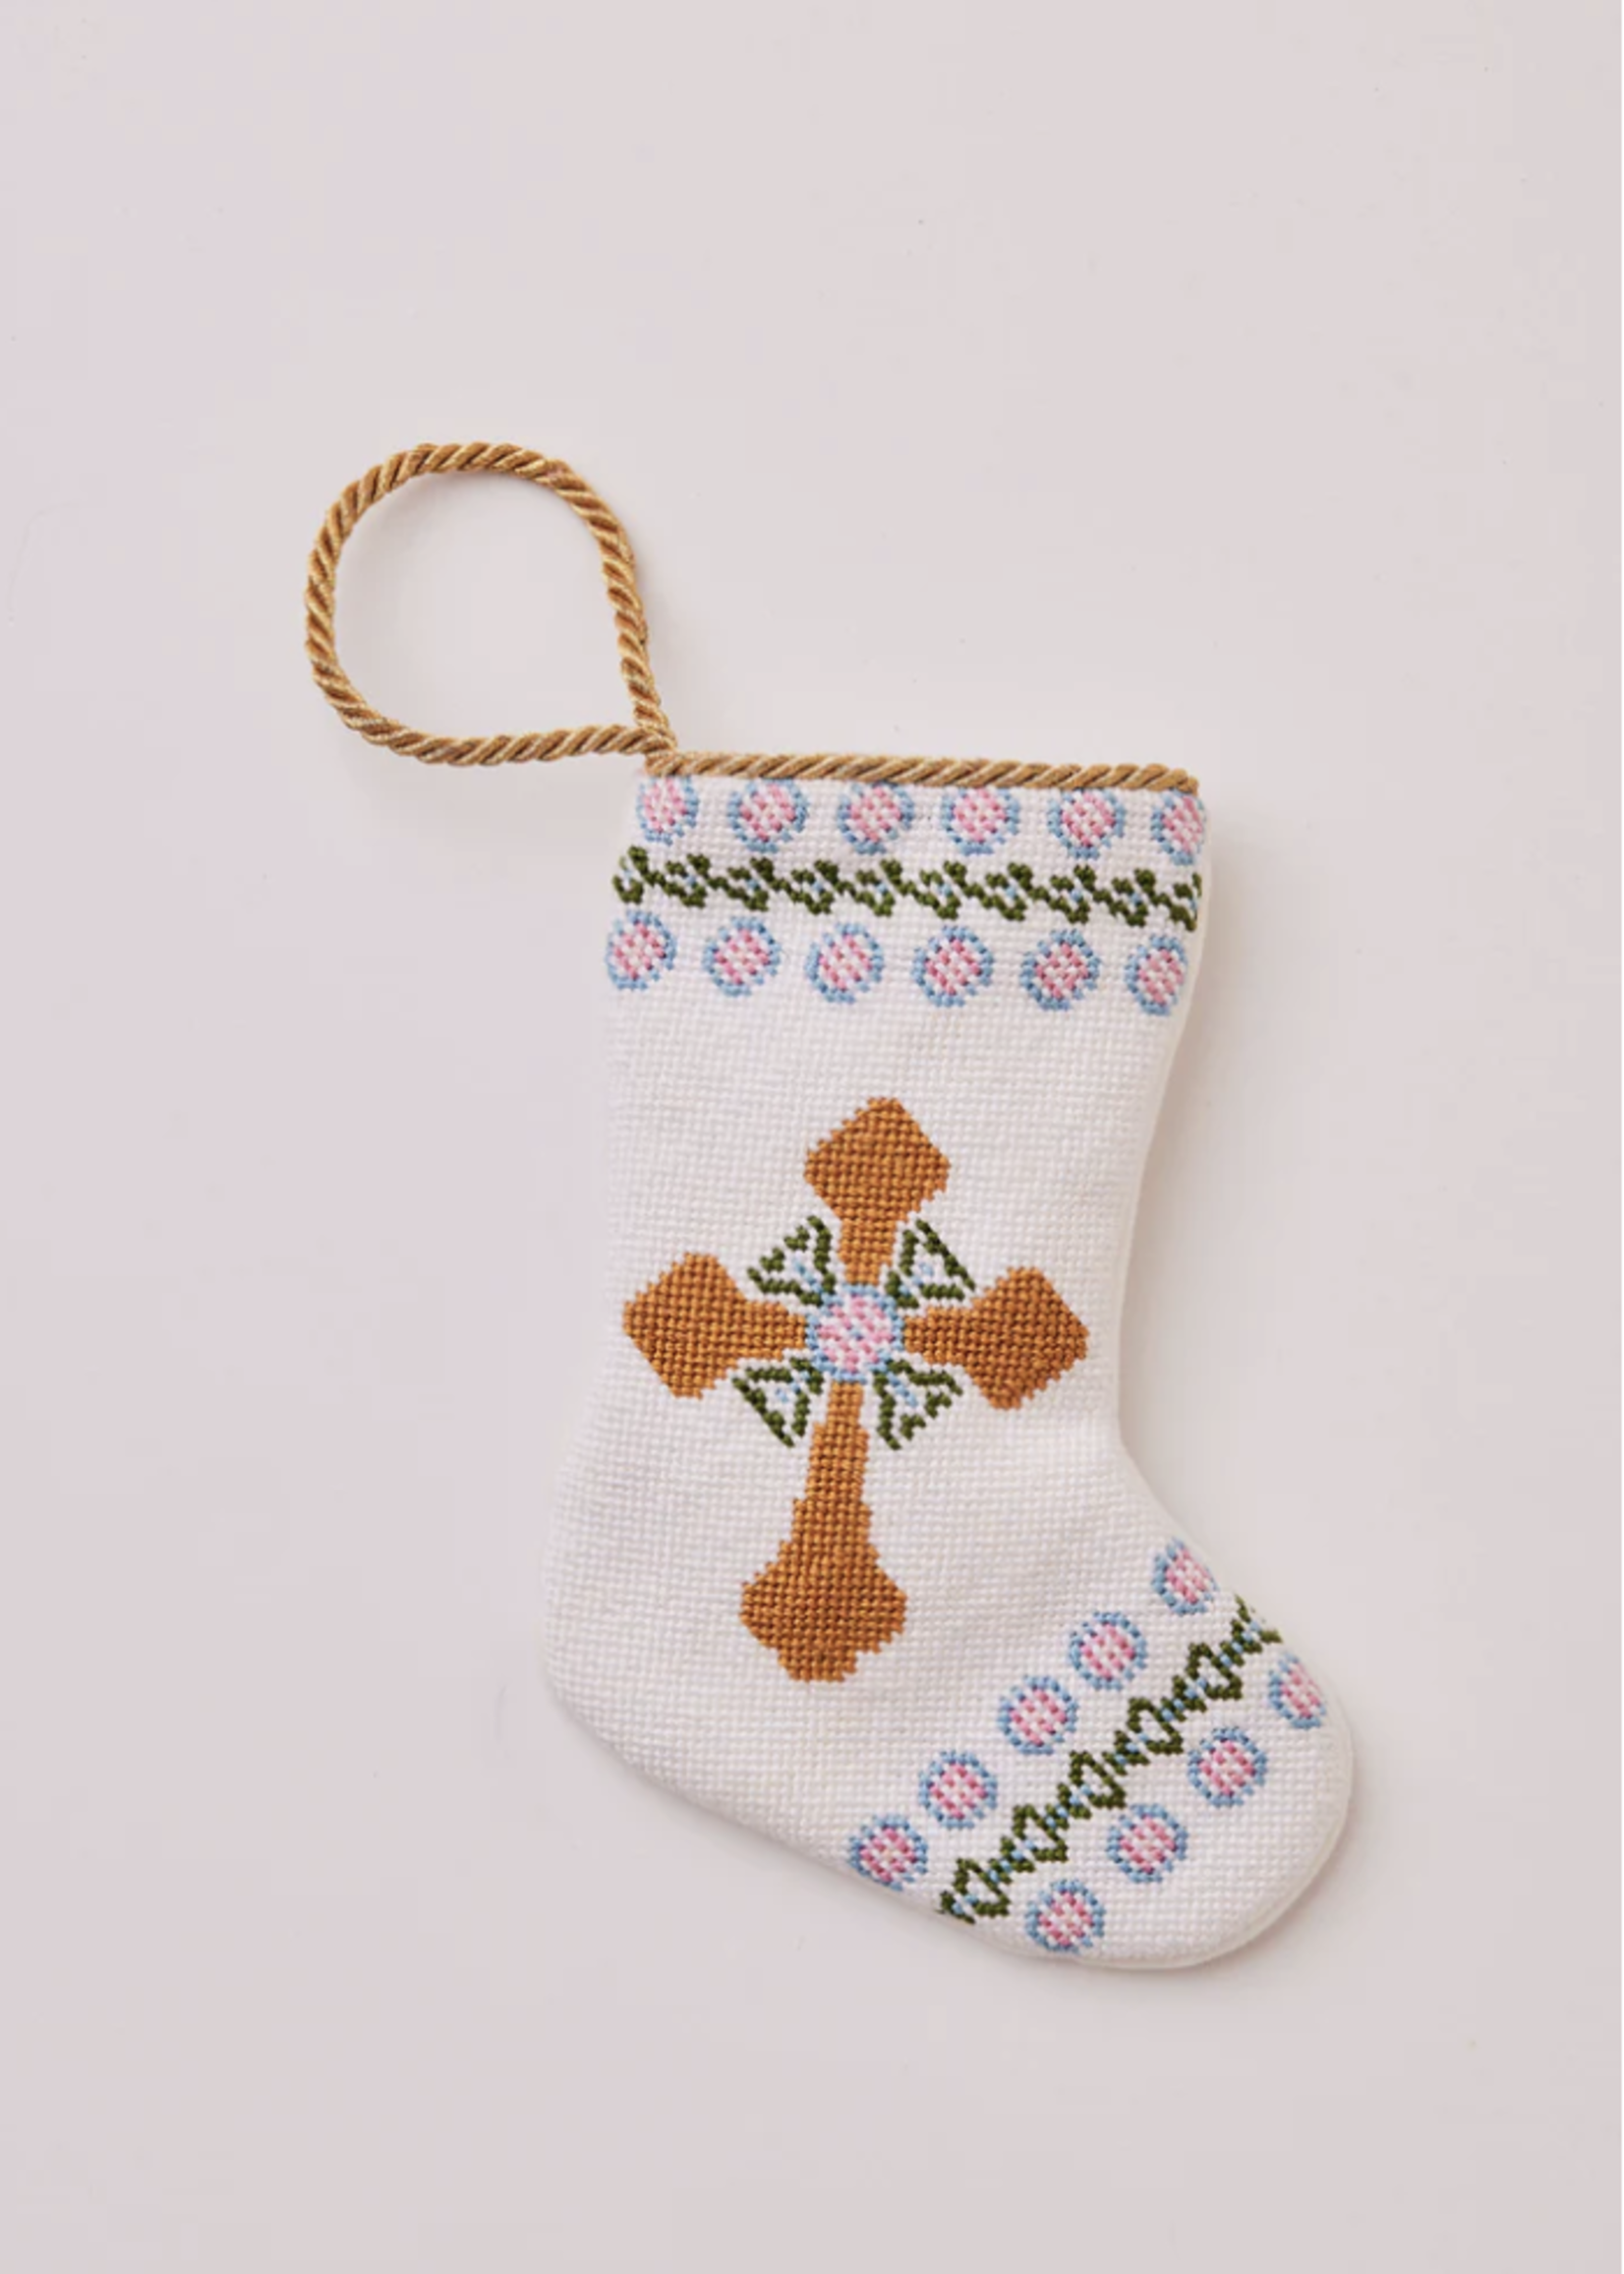 Bauble Stockings Bauble Stocking: Immanuel